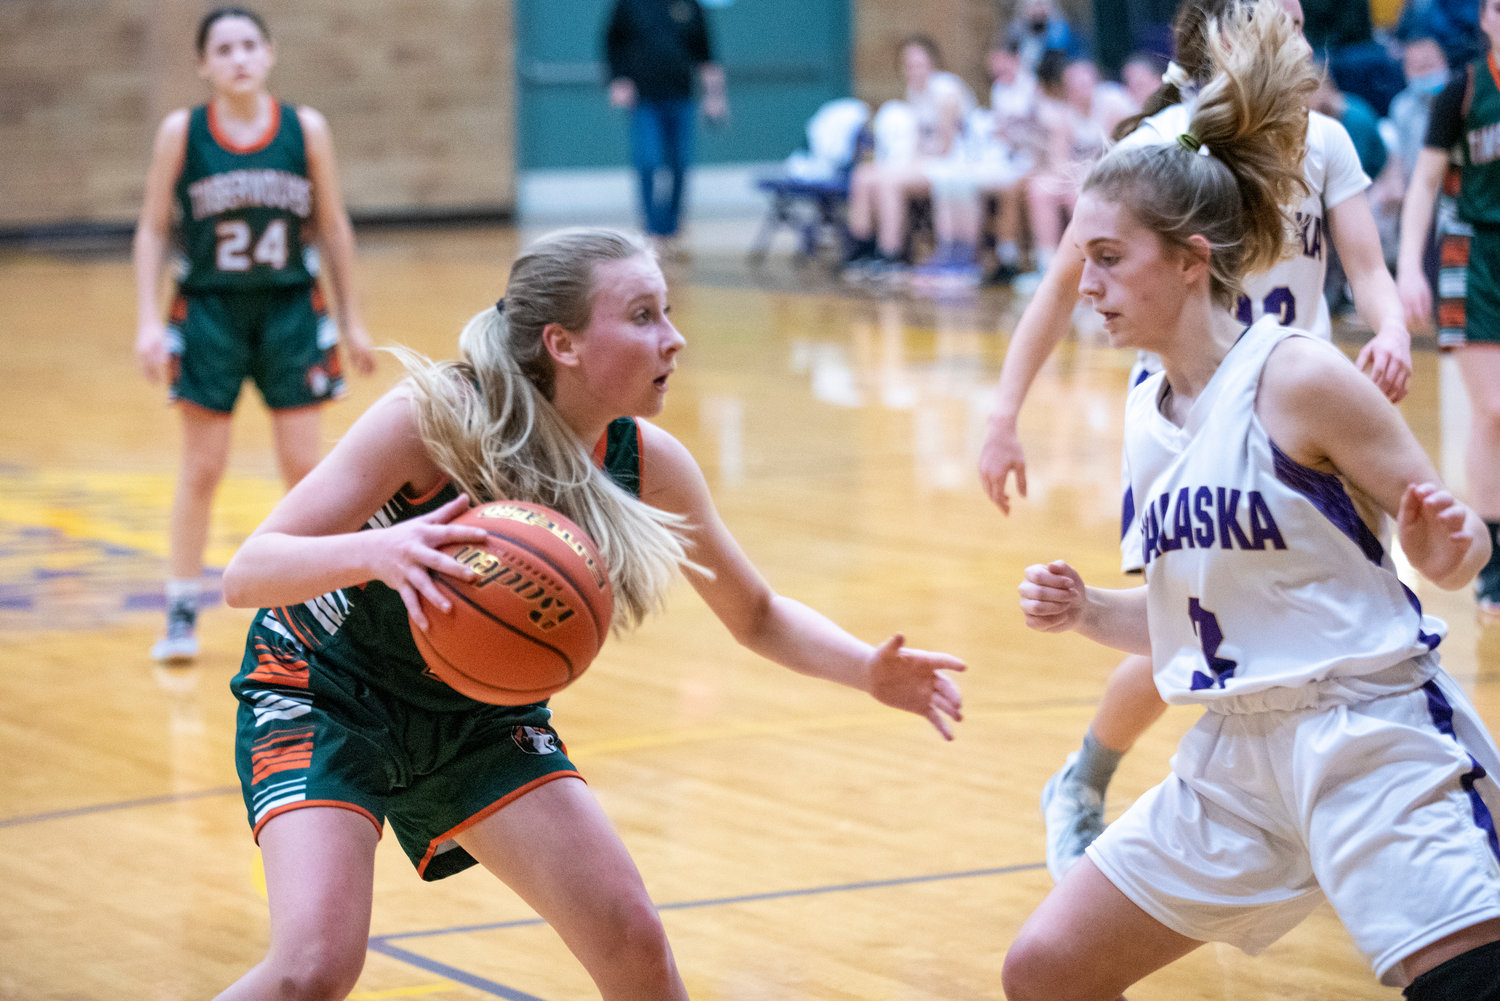 Morton-White Pass' Keira Miller, left, looks for space to operate against the defense of Onalaska's Jaycee Talley on Feb. 5.